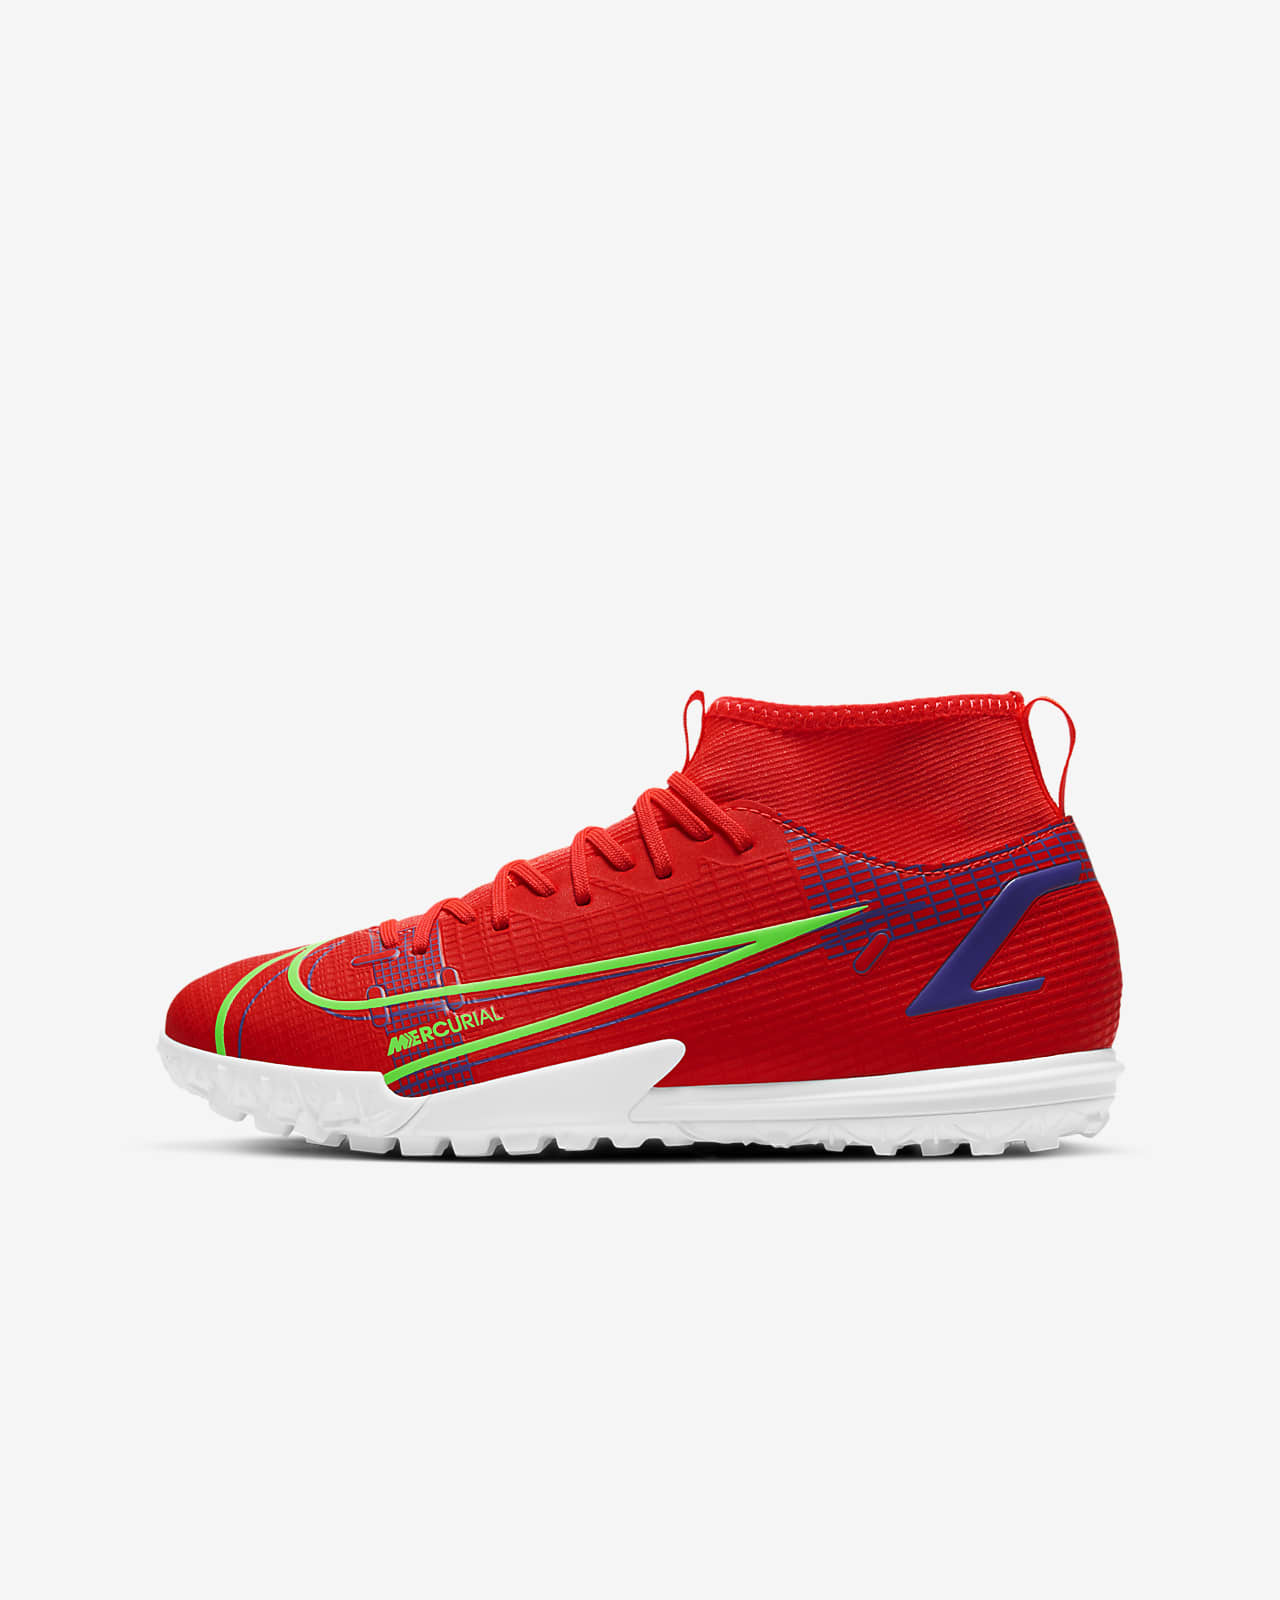 nike indoor turf soccer shoes